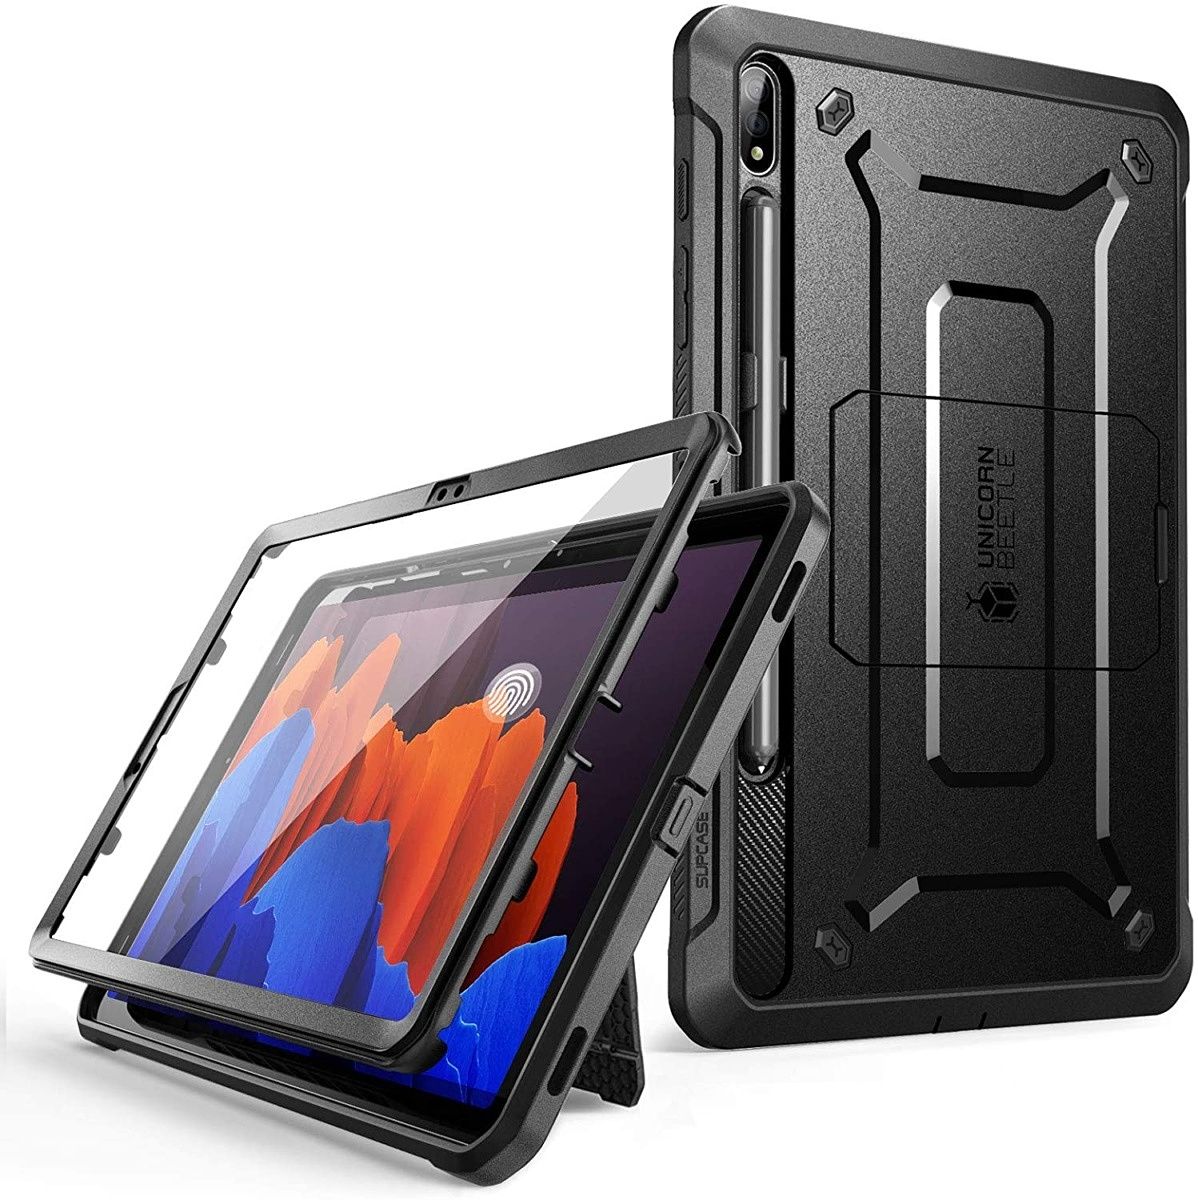 This case comes with a built-in screen protector, an S Pen holder, and a kickstand for landscape viewing.